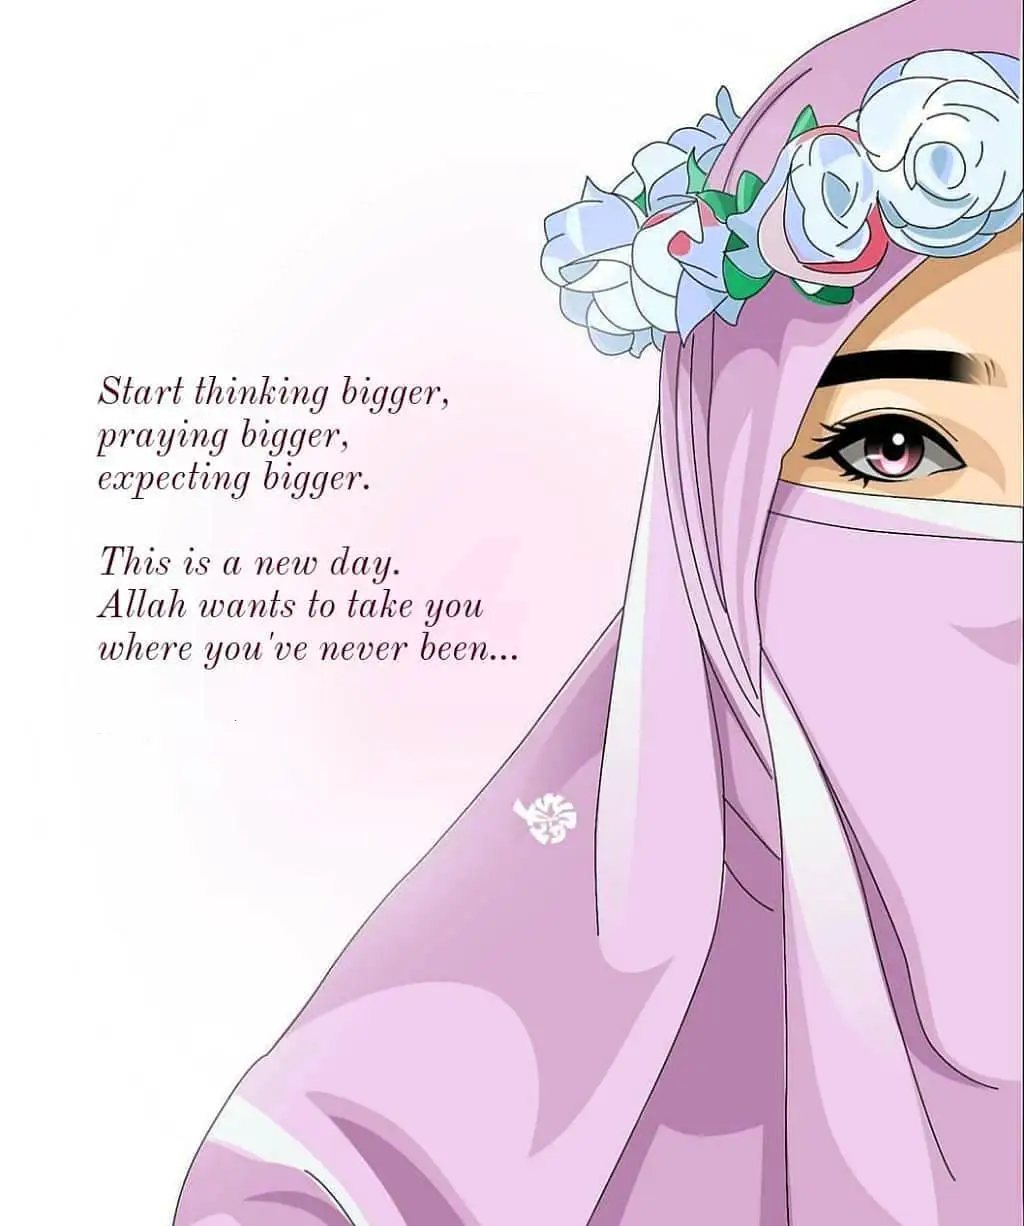 start thinking bigger praying bigger expecting bigger. This is a new day Allah wants to take you where youve never been